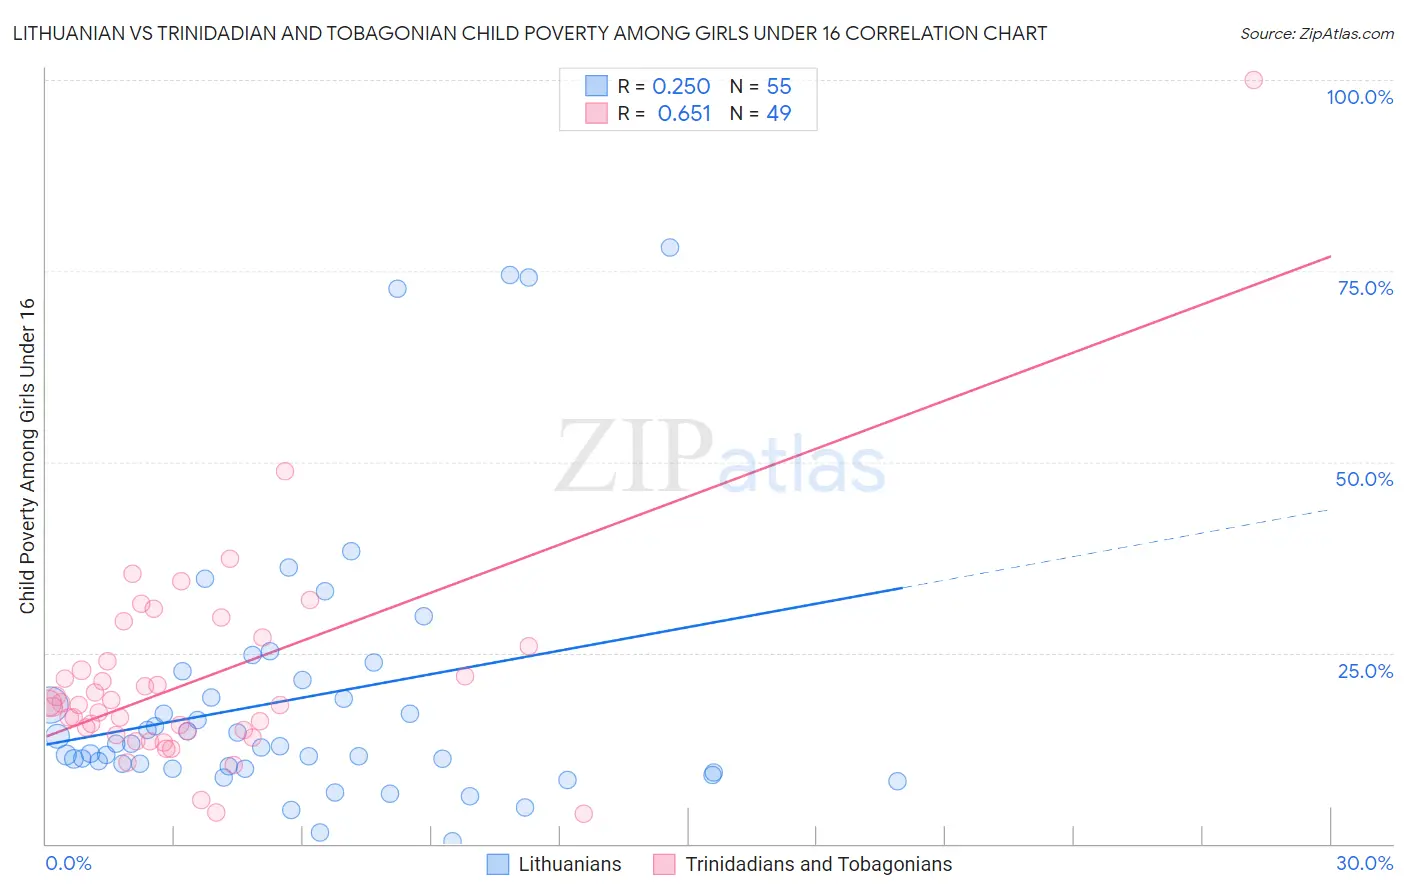 Lithuanian vs Trinidadian and Tobagonian Child Poverty Among Girls Under 16